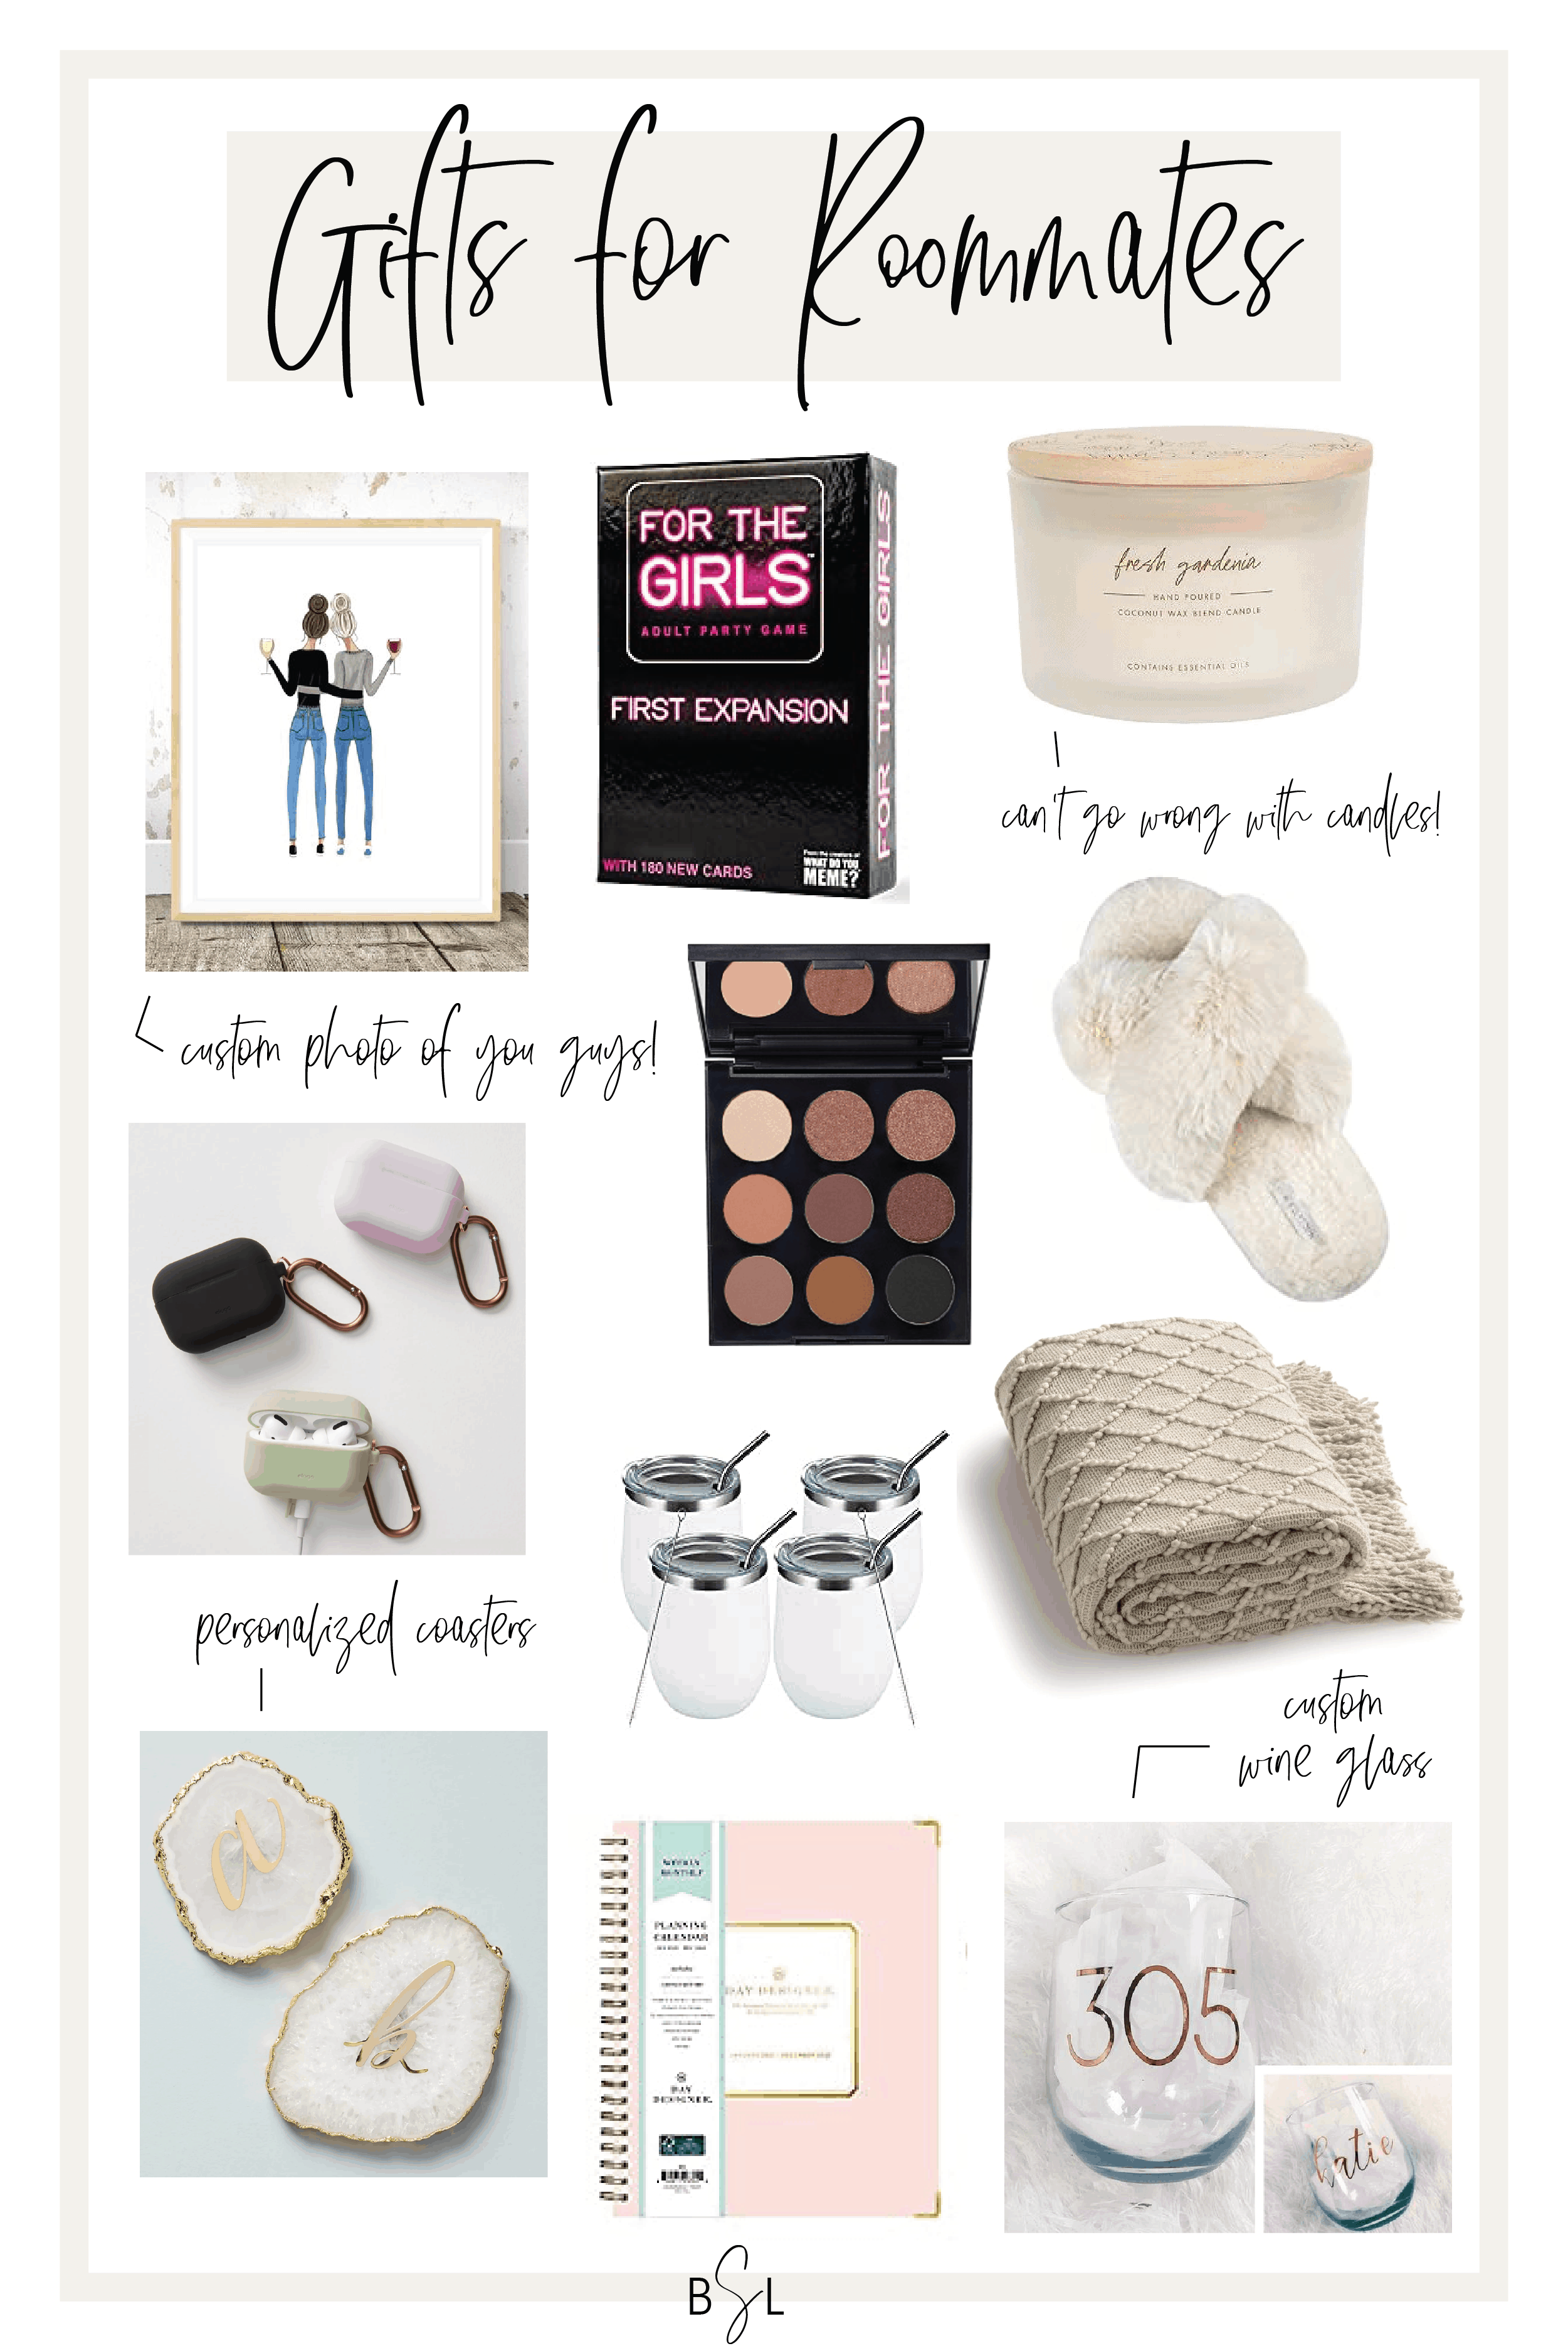 Best Gifts for Women - 46 Thoughtful Ideas for Any Budget | TIME Stamped